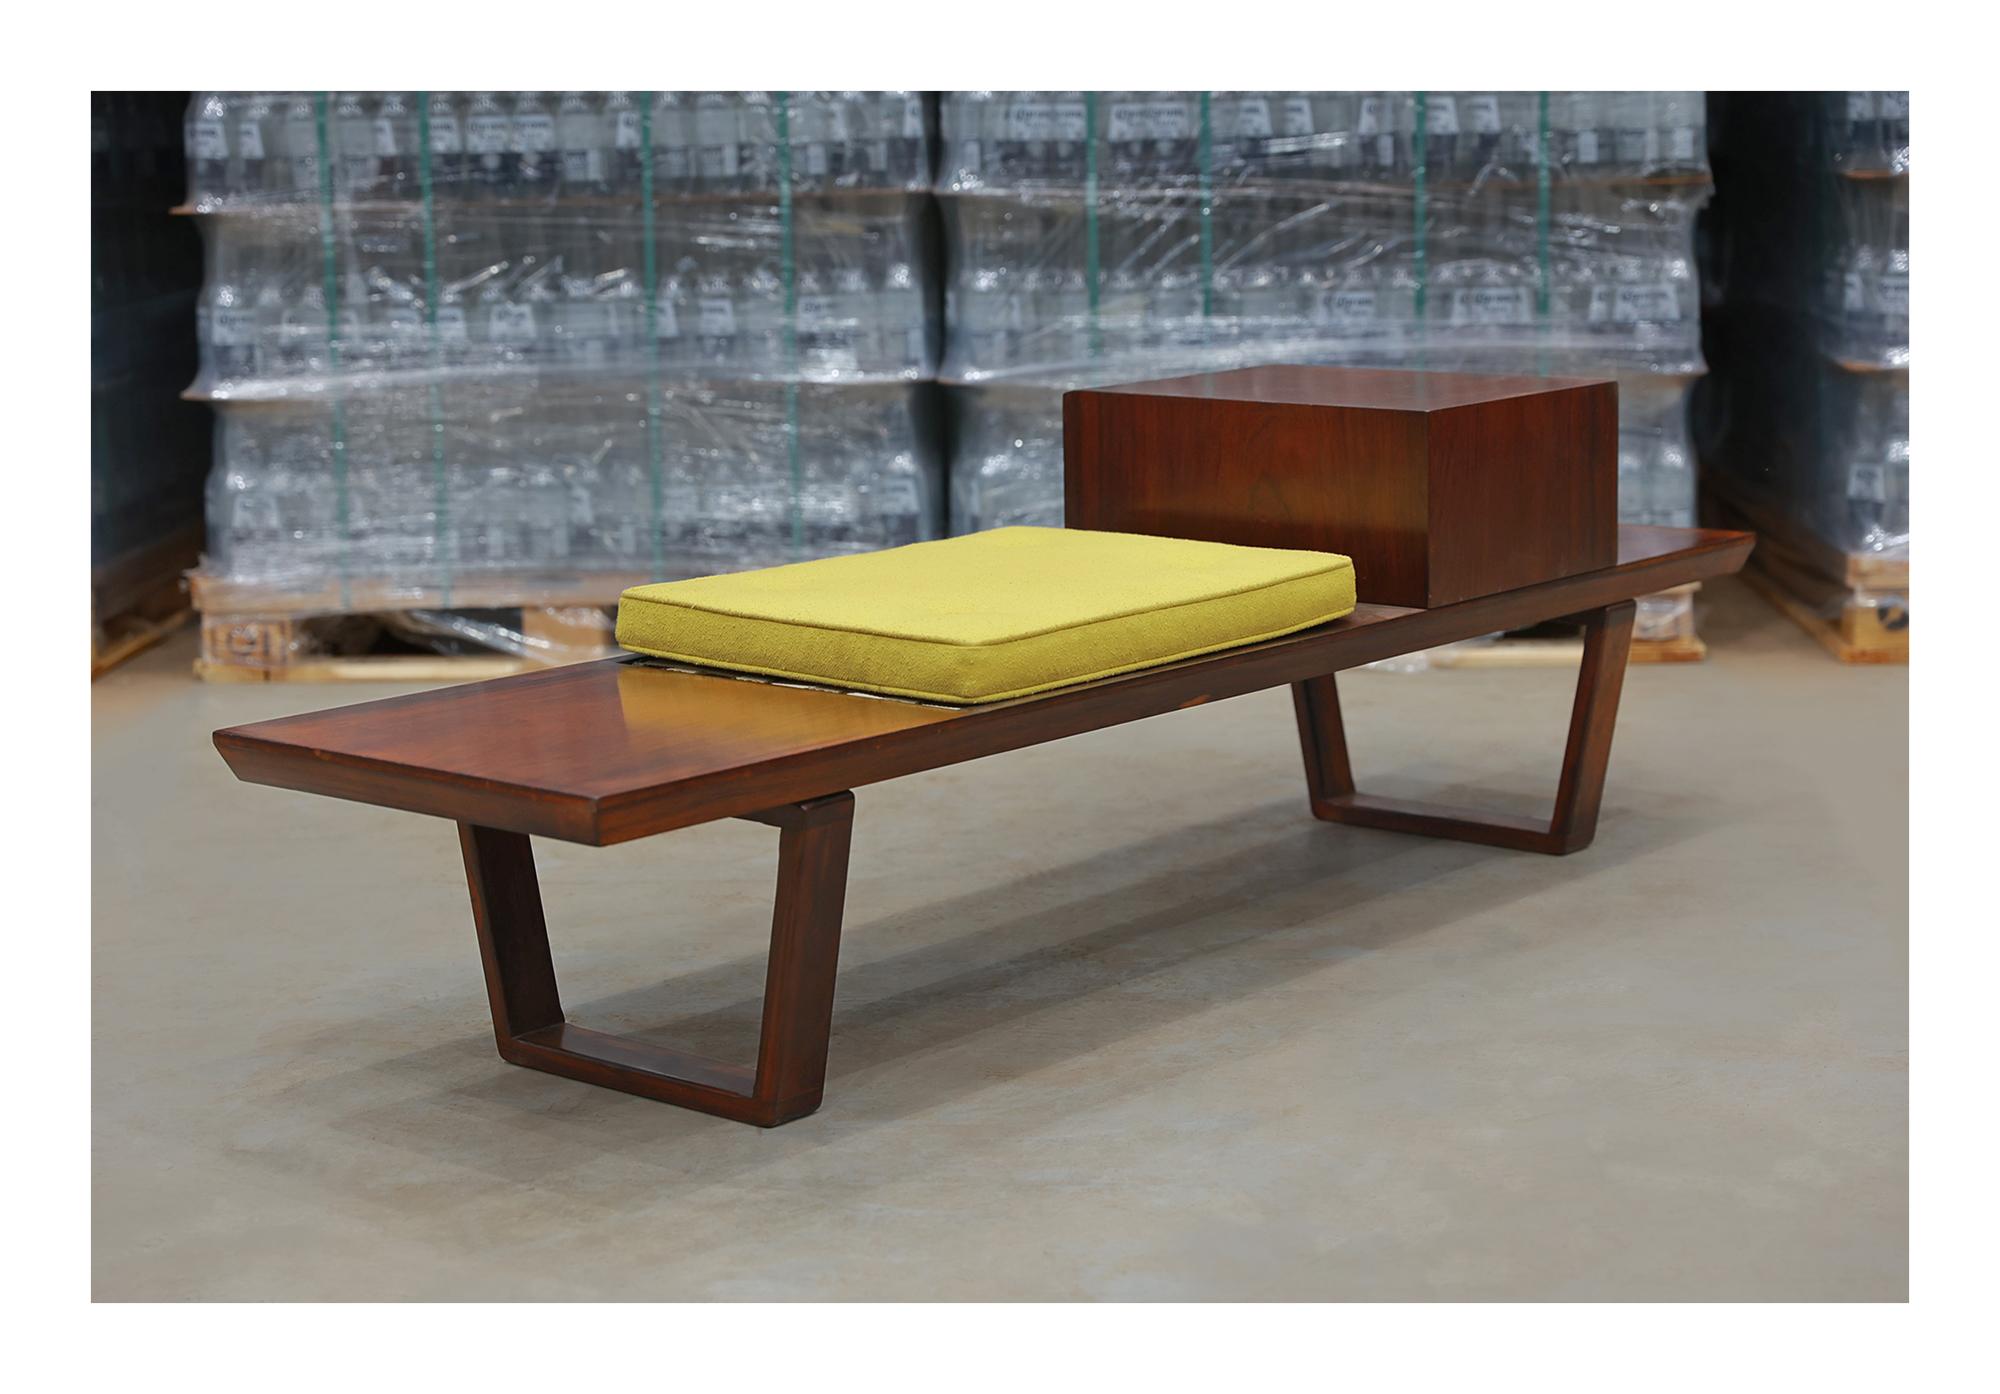  Brazilian Modern Bench in Hardwood, by Carlo Hauner for Forma, Brazil, c. 1950 In Good Condition For Sale In New York, NY